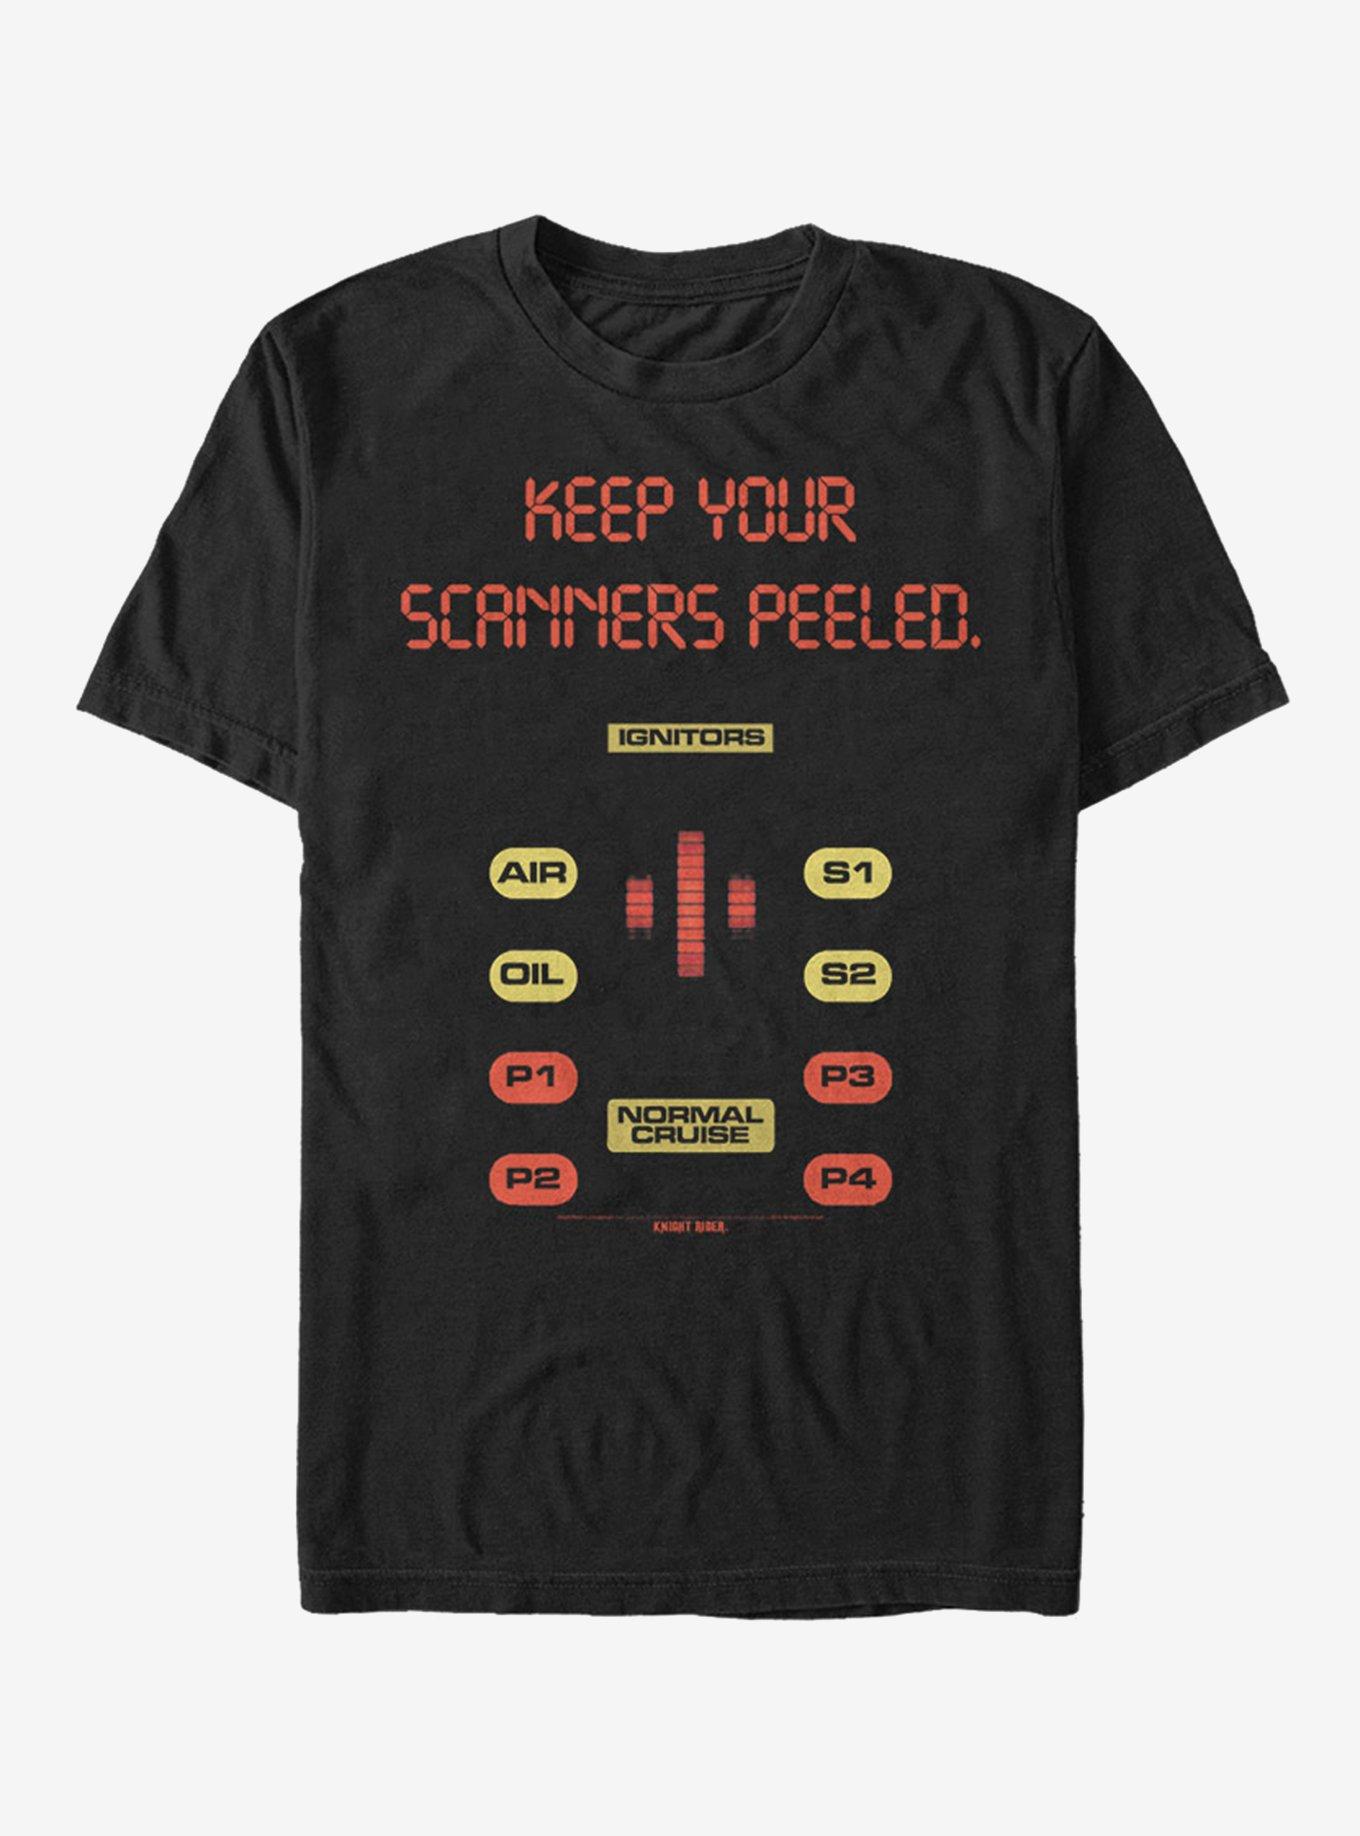 Knight Rider Scanners Peeled T-Shirt, BLACK, hi-res